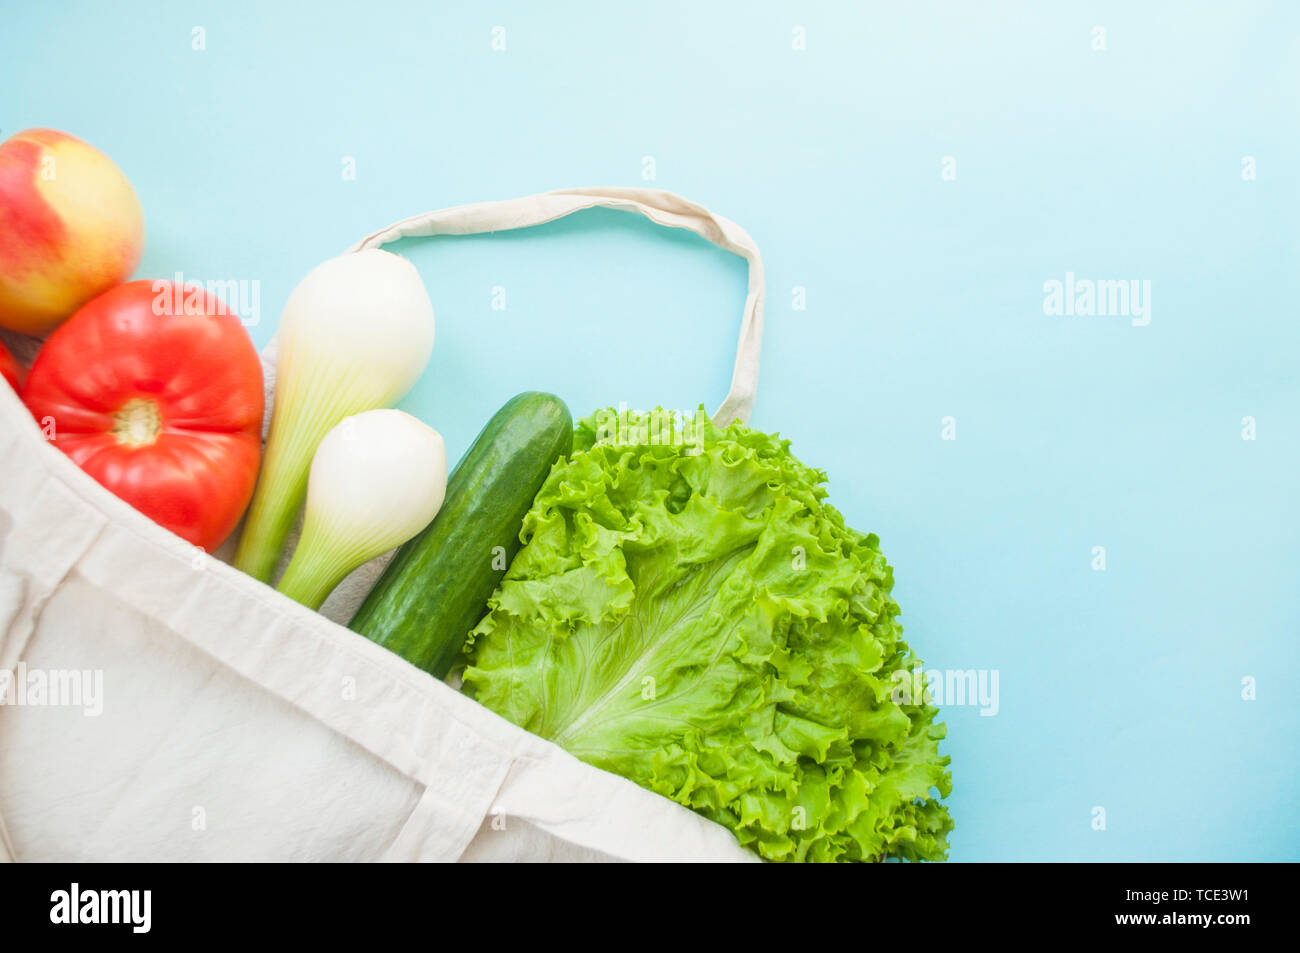 Fresh fruits and vegetables in eco bag on turquoise color background with copyspace. Zero waste concept. Stock Photo